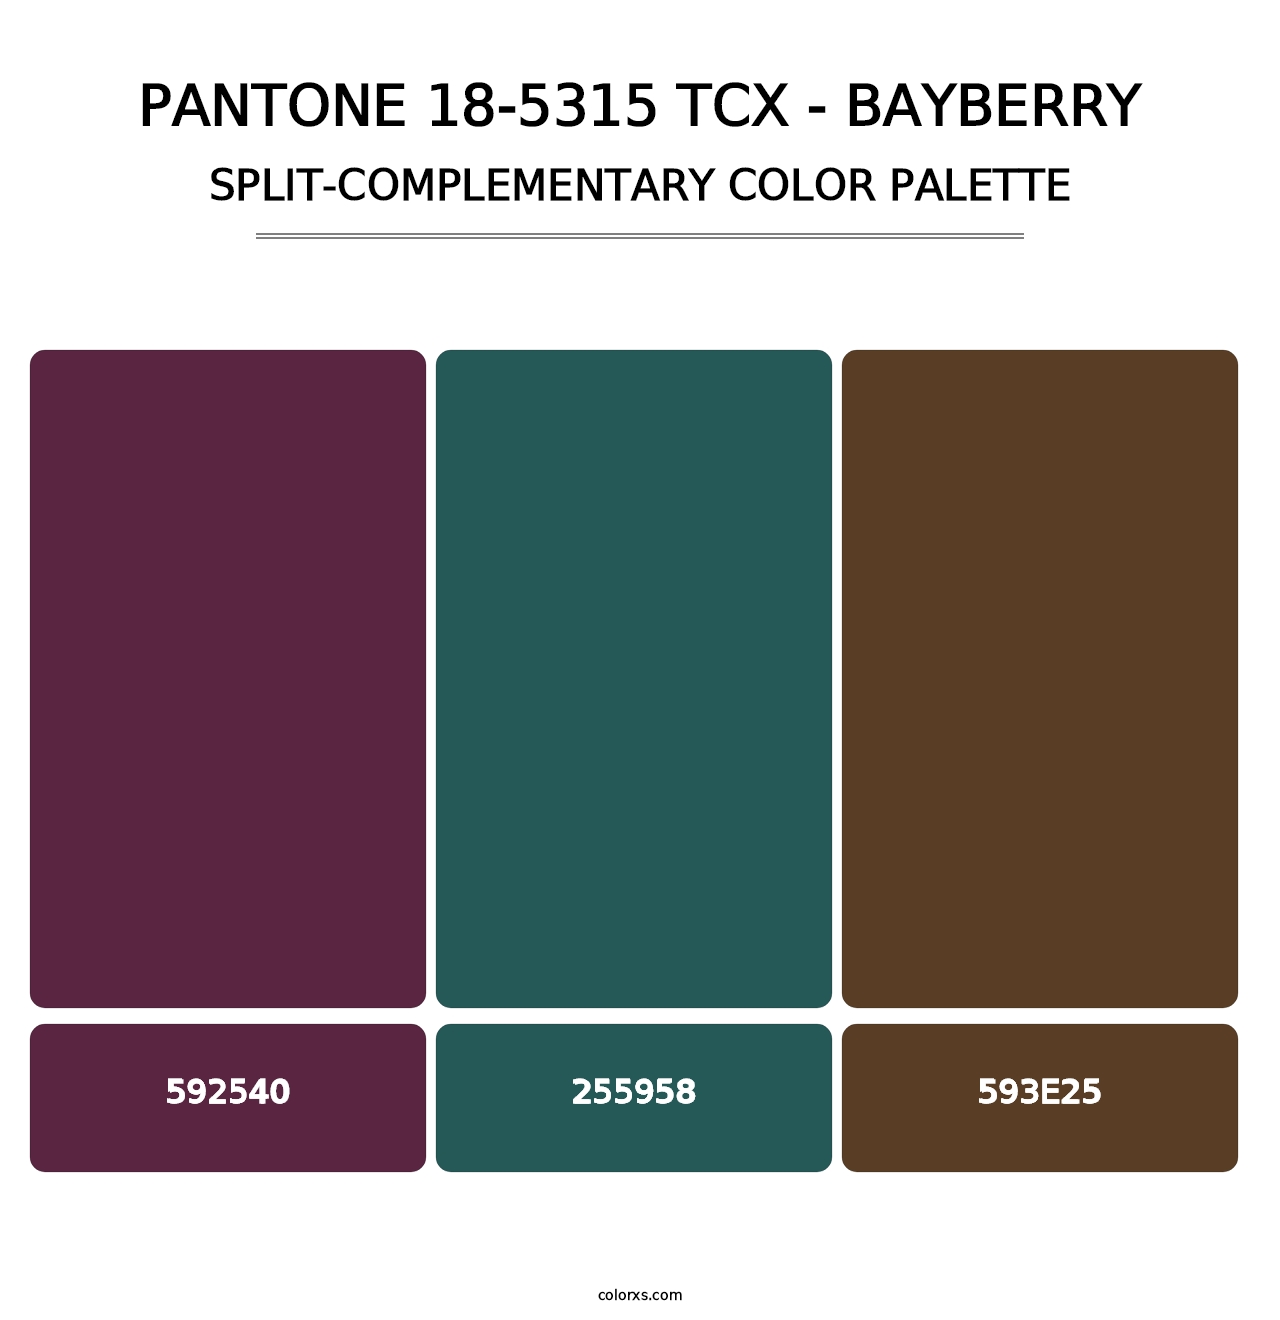 PANTONE 18-5315 TCX - Bayberry - Split-Complementary Color Palette